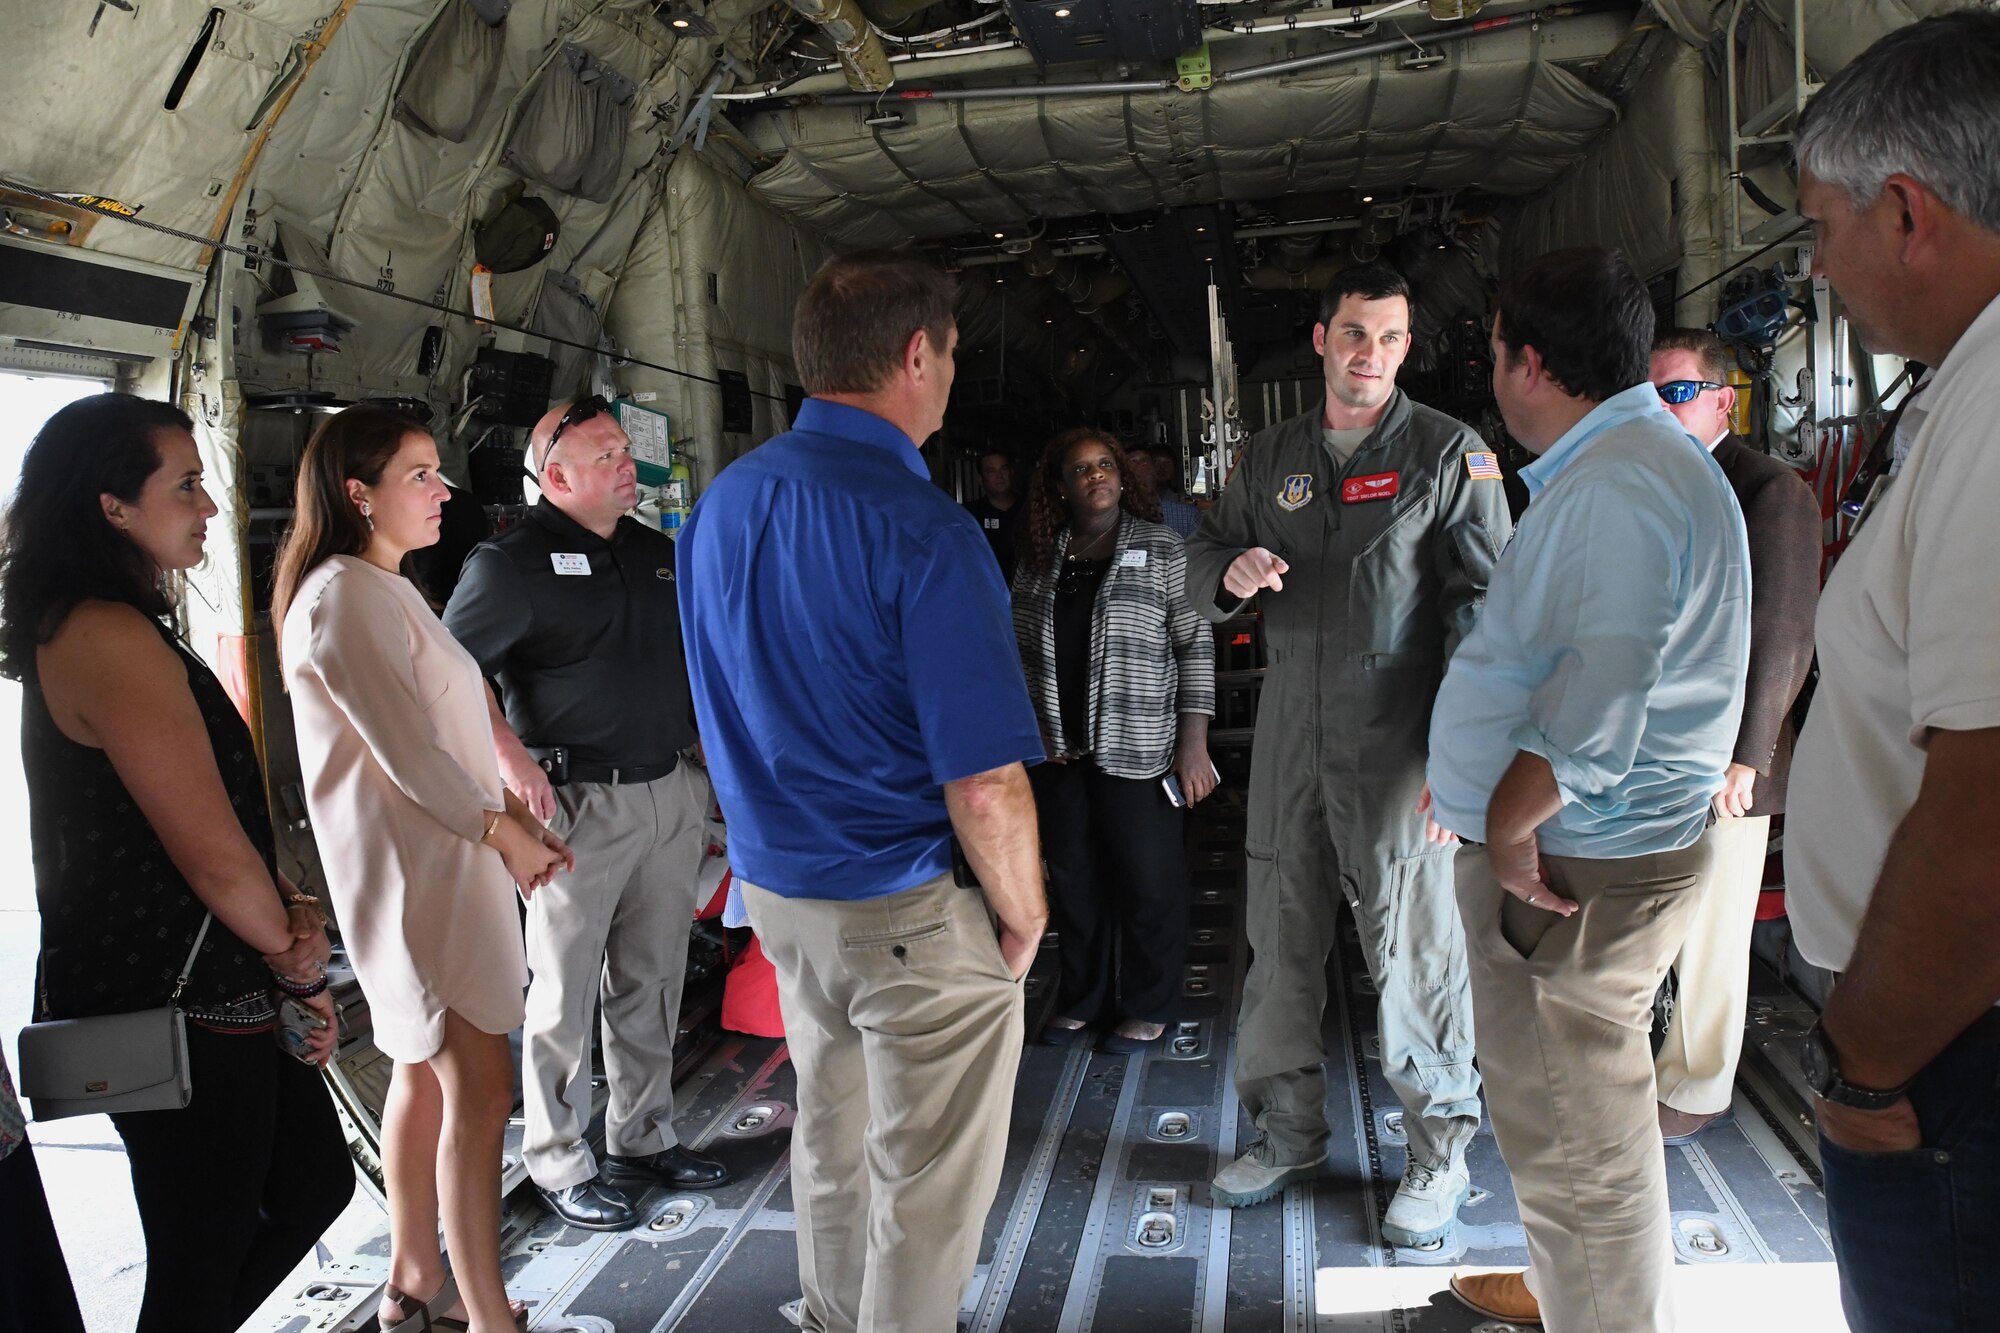 Tech. Sgt. Taylor Noel, 815th Airlift Squadron loadmaster, provides a briefing of C-130 Super Hercules aircraft mission capabilities during the Mississippi Gulf Coast Chamber Leadership Gulf Coast tour Oct. 11, 2017, on Keesler Air Force Base, Mississippi. The program is designed to prepare the areas current and potential leaders for the future with the goal to create a communication network between present and emerging leaders dedicated to the improvement of the Mississippi Gulf Coast by attending a monthly session focused on industry. (U.S. Air Force photo by Kemberly Groue)